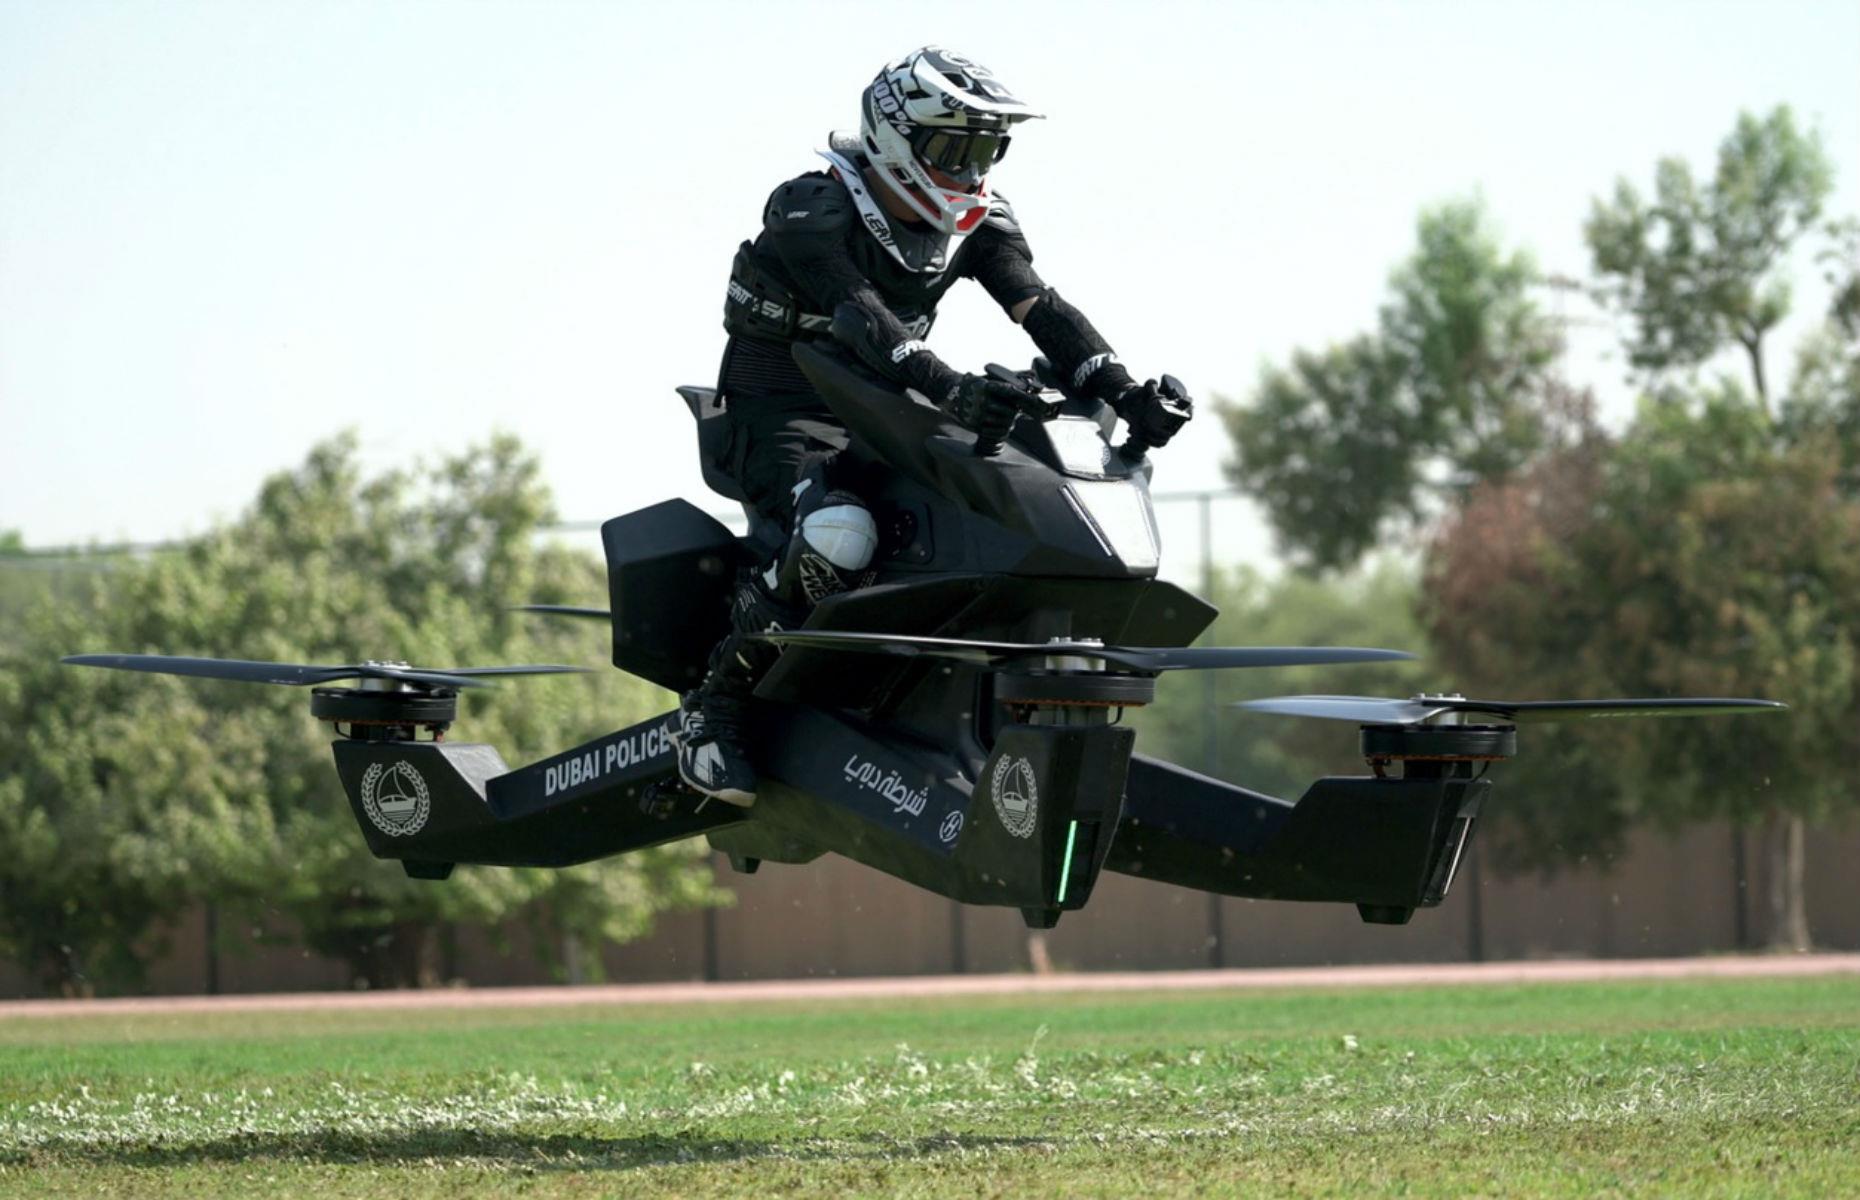 Have a Star Wars moment on a hoverbike